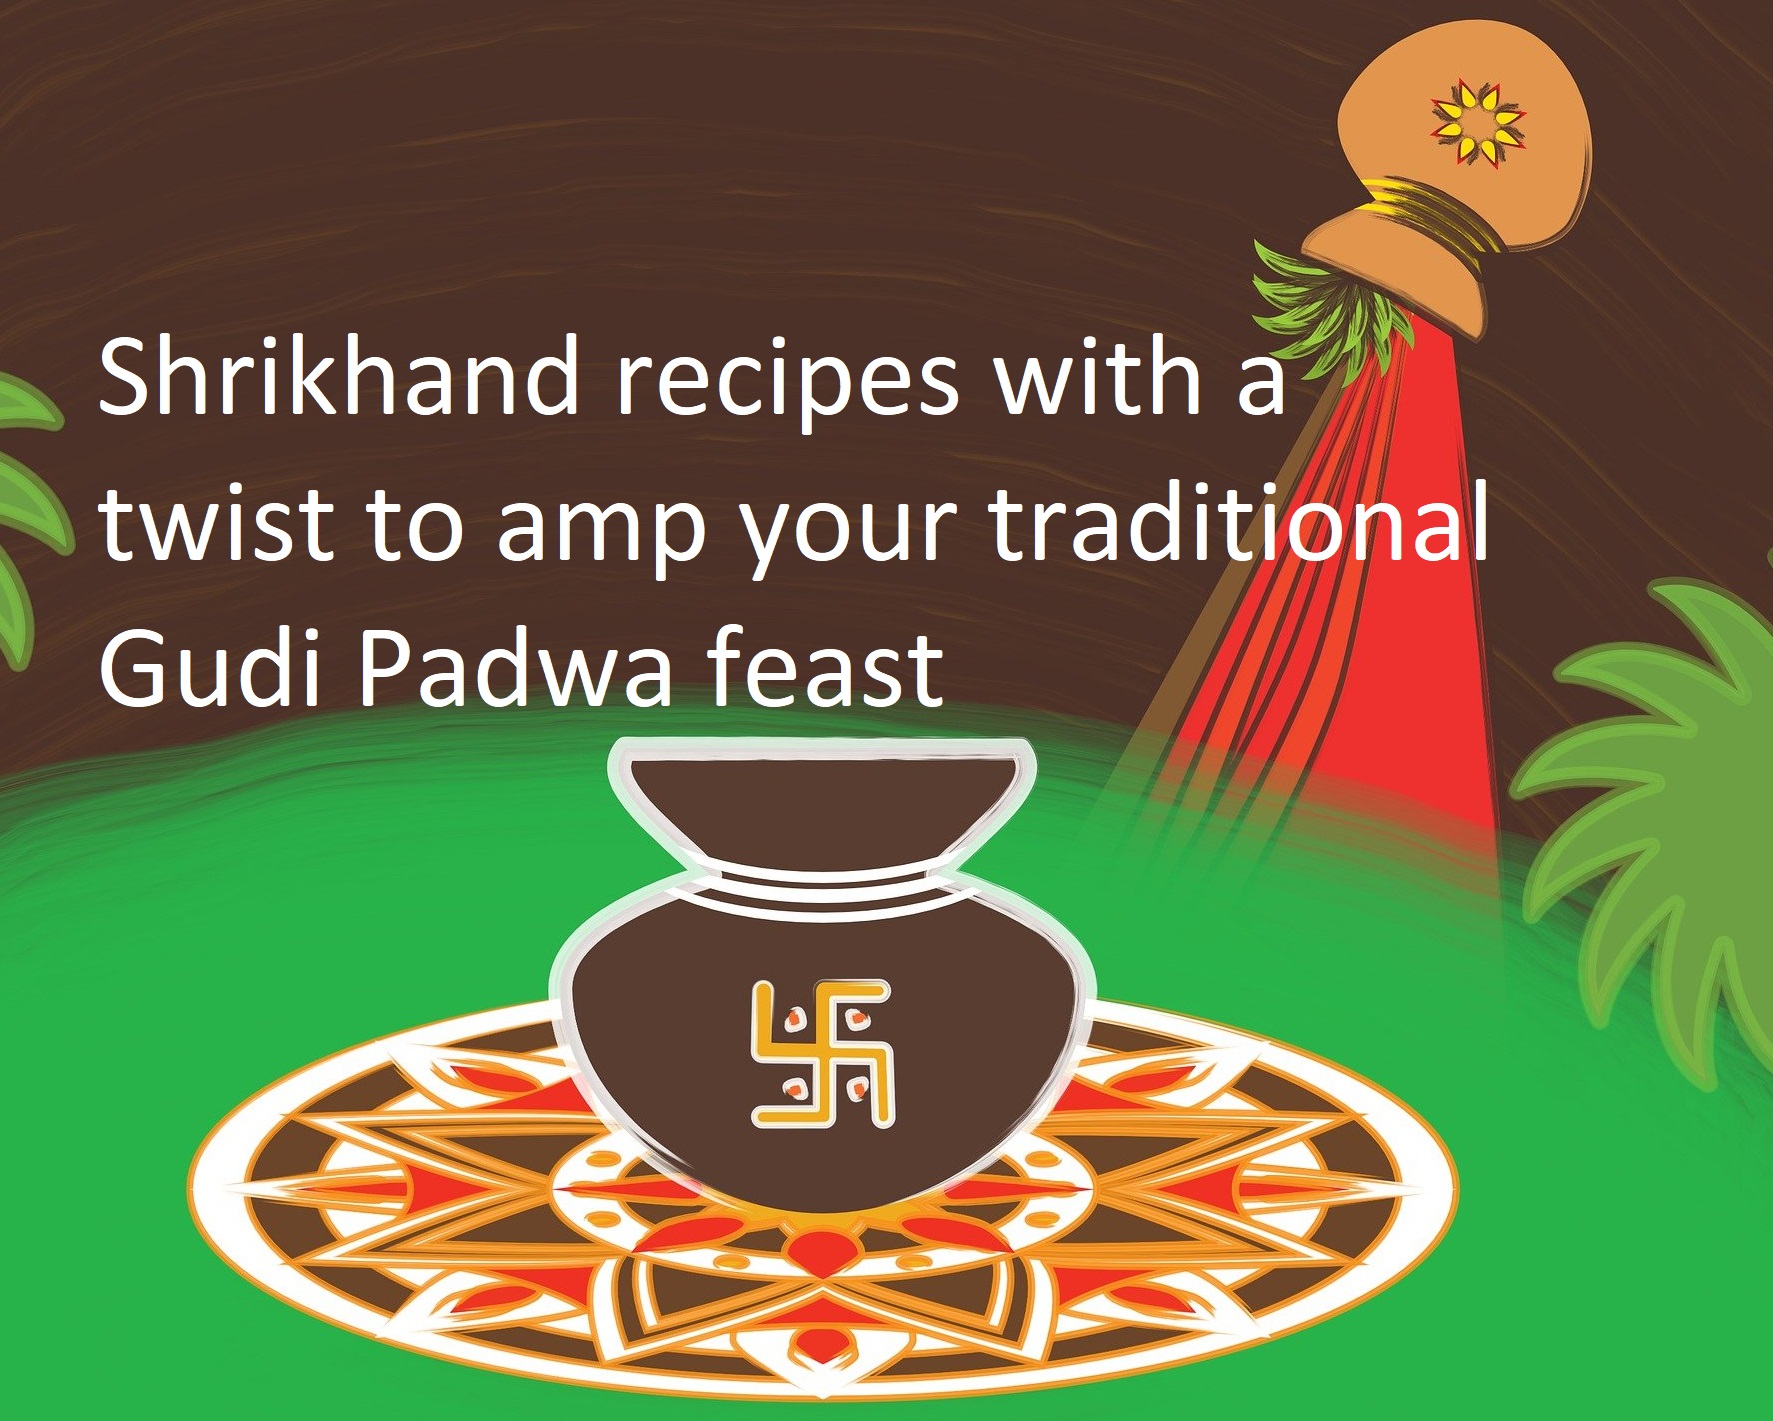  Shrikhand recipes with a twist to amp your traditional Gudi Padwa feast 